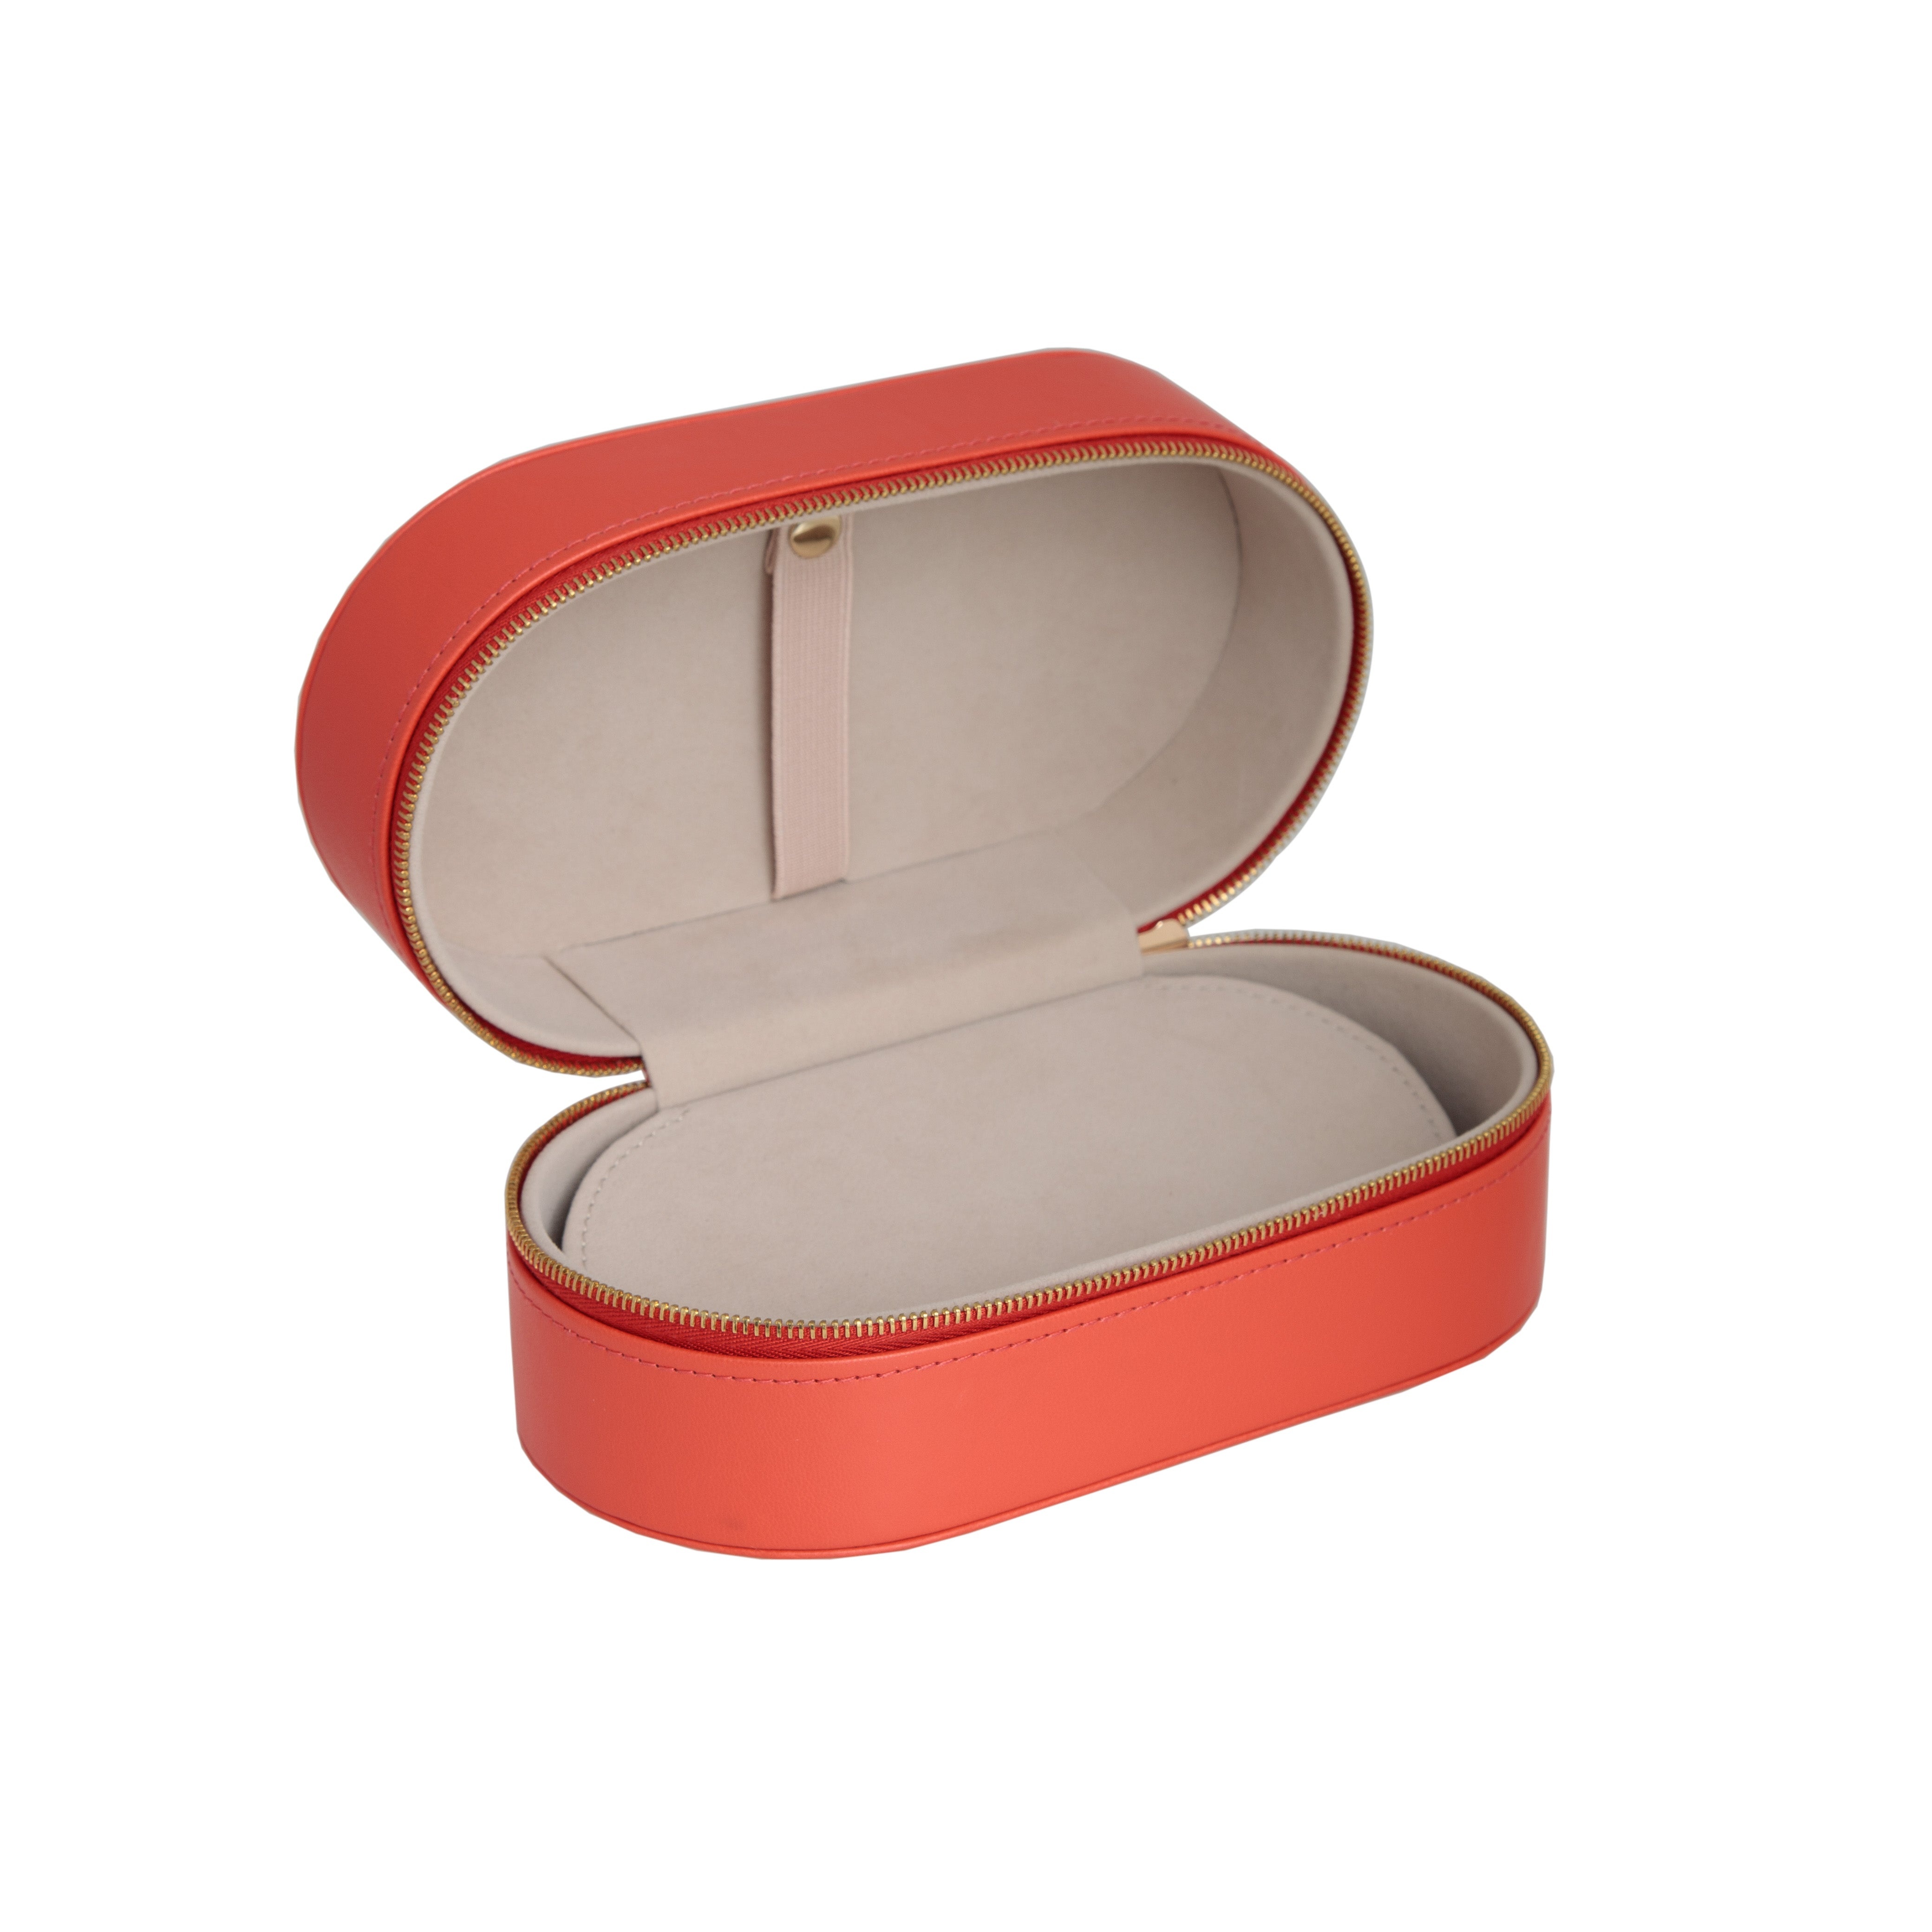 LINDA FARROW OVAL TRAVEL CASE IN CORAL - 3